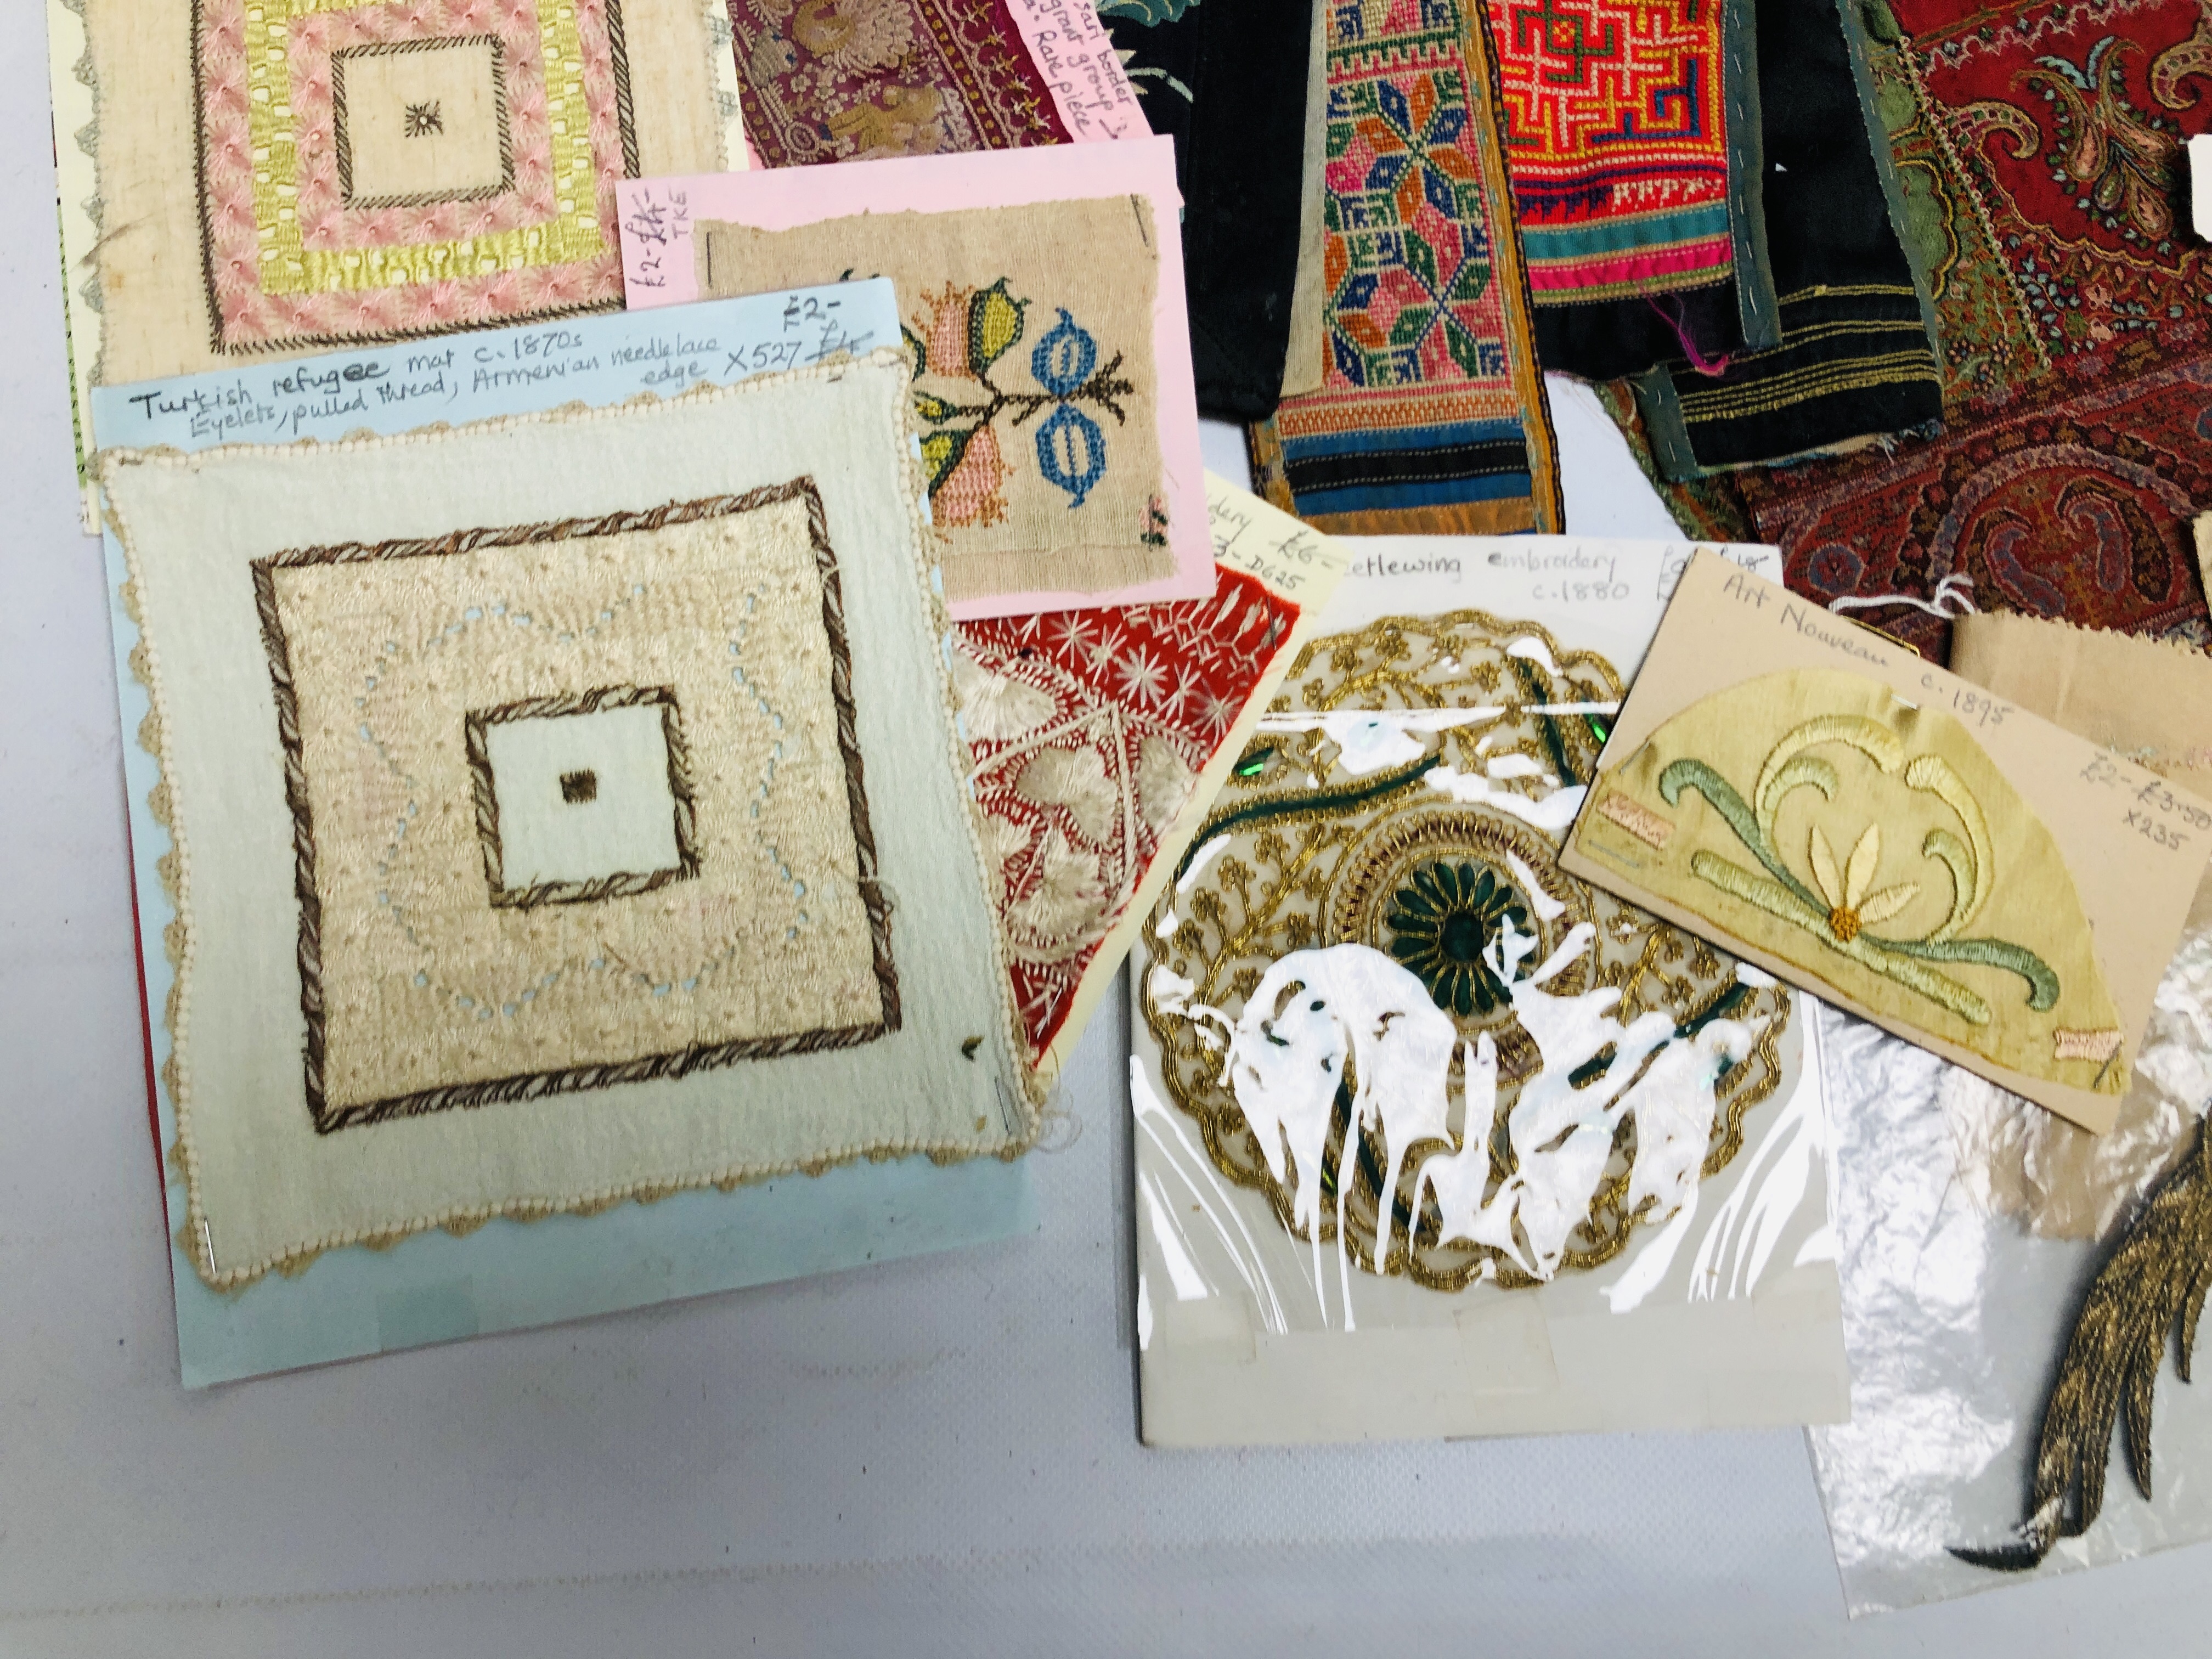 TWO BOXES CONTAINING AN EXTENSIVE COLLECTION OF TEXTILES EXAMPLES. - Image 2 of 8